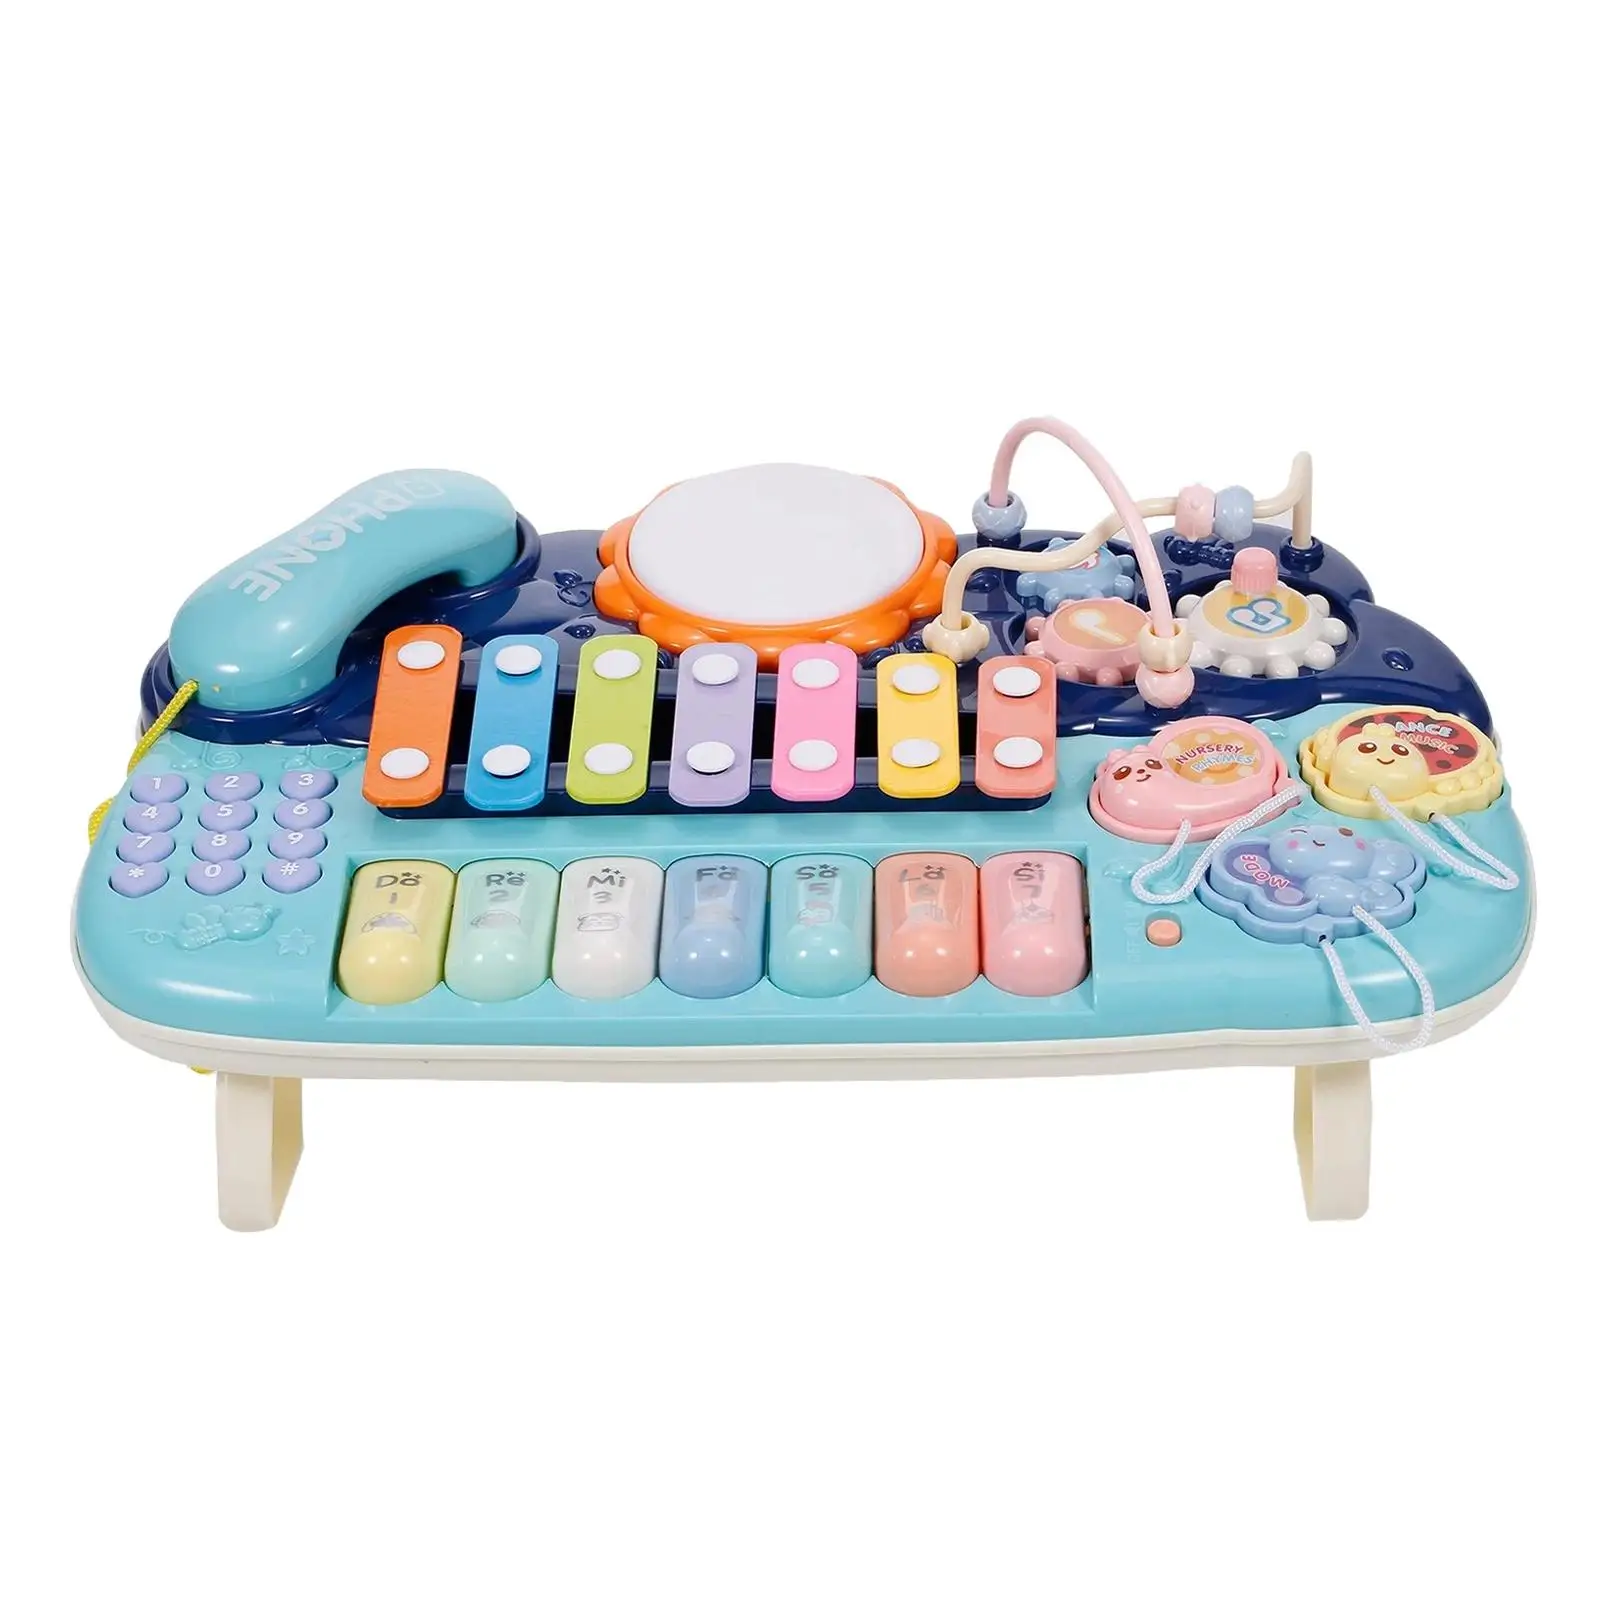 Musical Instruments Toys, Electronic Piano Keyboard Xylophone Drum Blue